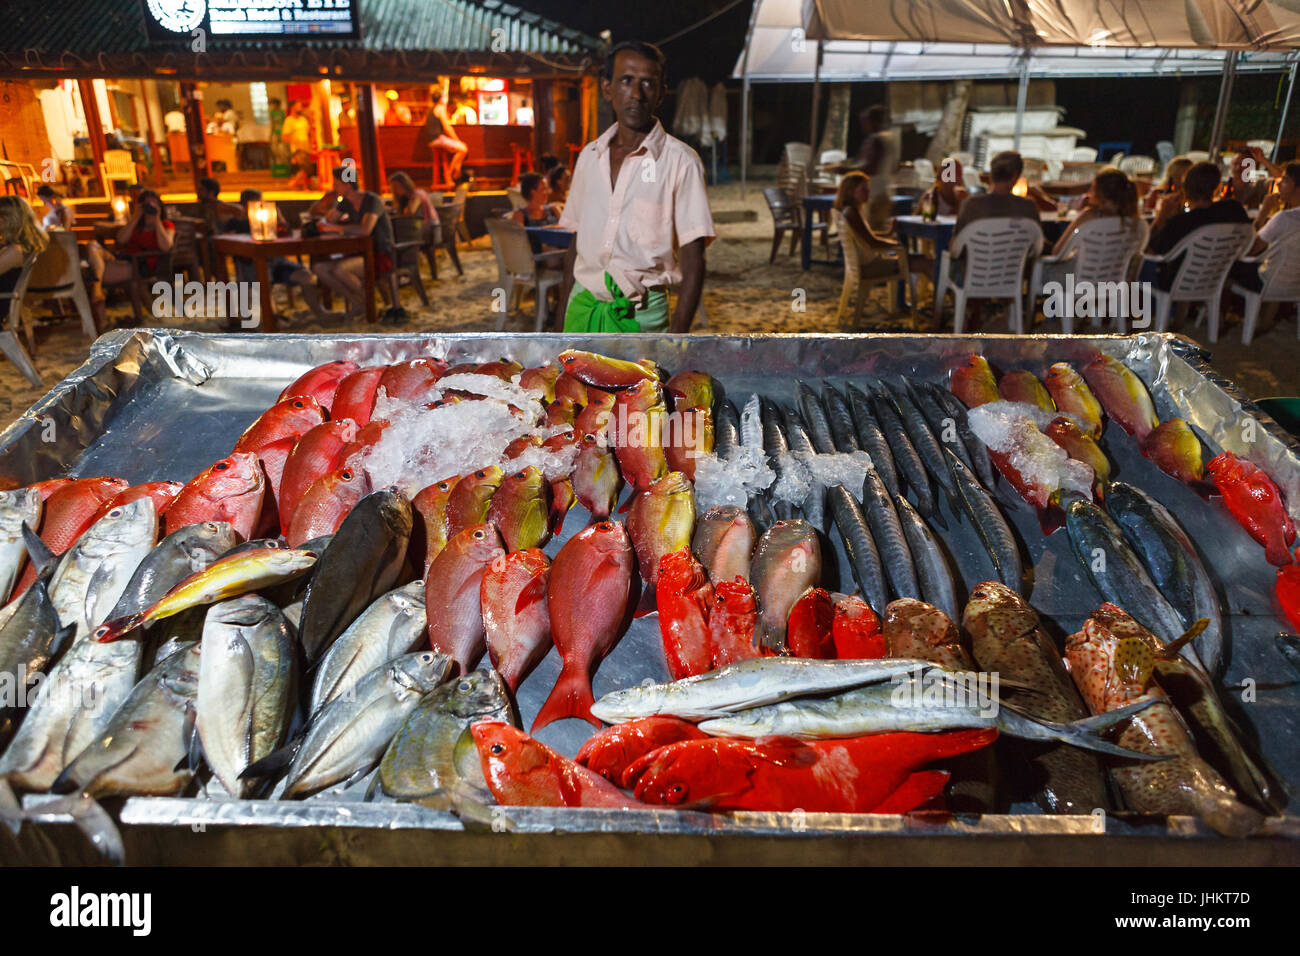 MIRISSA, SRI LANKA, MARCH 16, 2016: restaurants on the beach offer a wide variety of fish, you only need to point at fish you want to eat Stock Photo